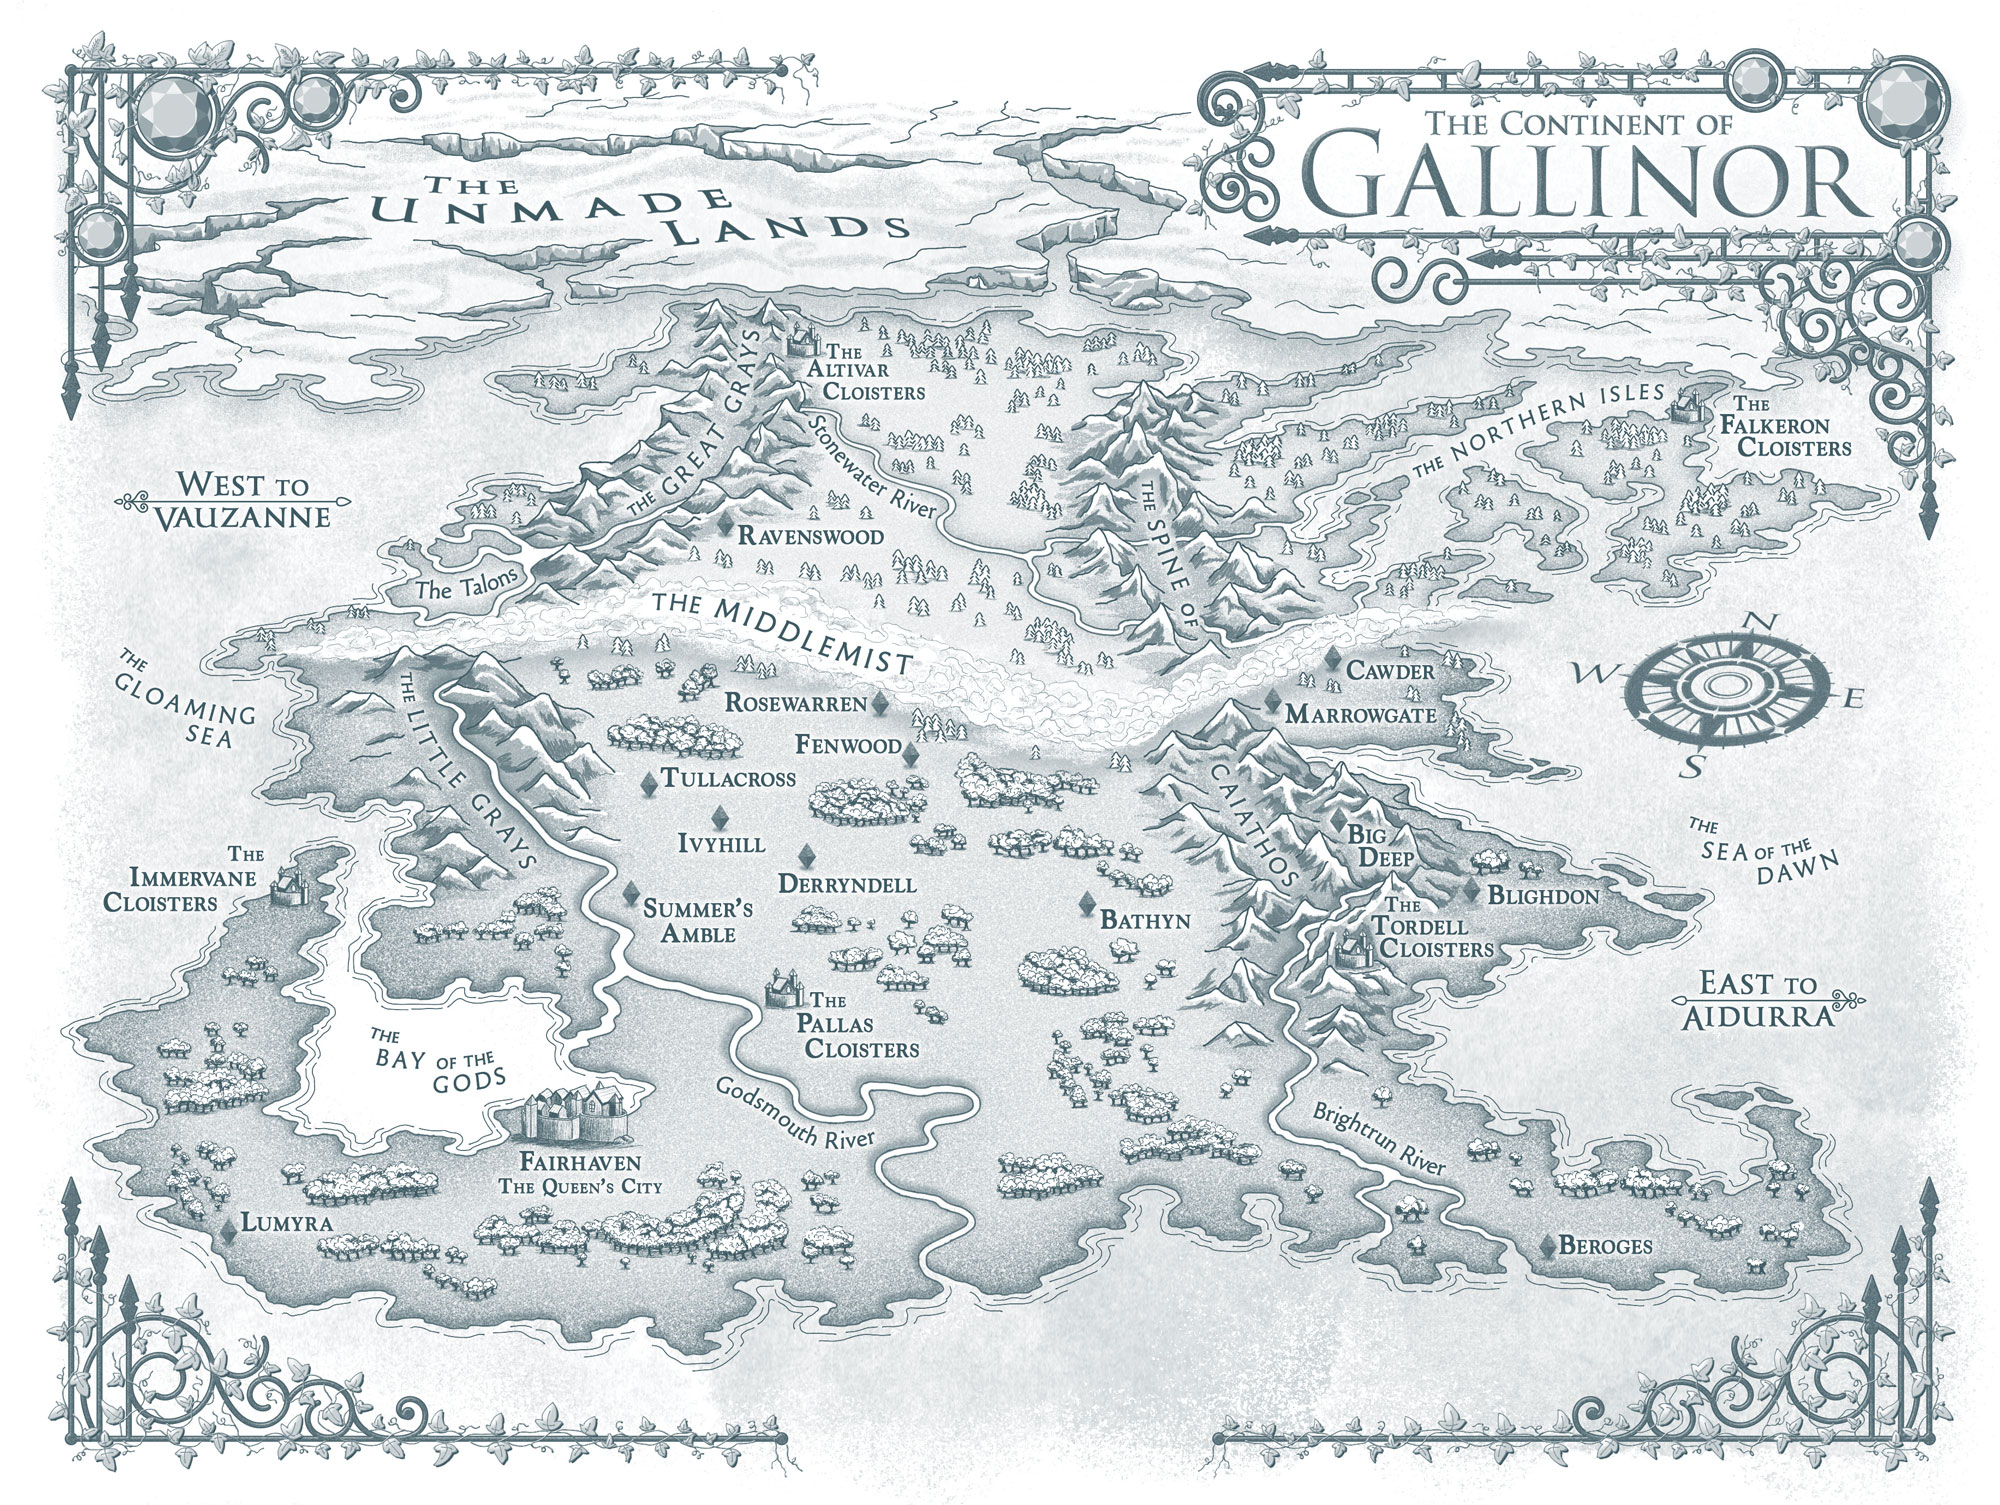 Map of the continent of Gallinor, which appears in all copies of Claire Legrand's A CROWN OF IVY AND GLASS. Illustrator: Travis Hasenour.